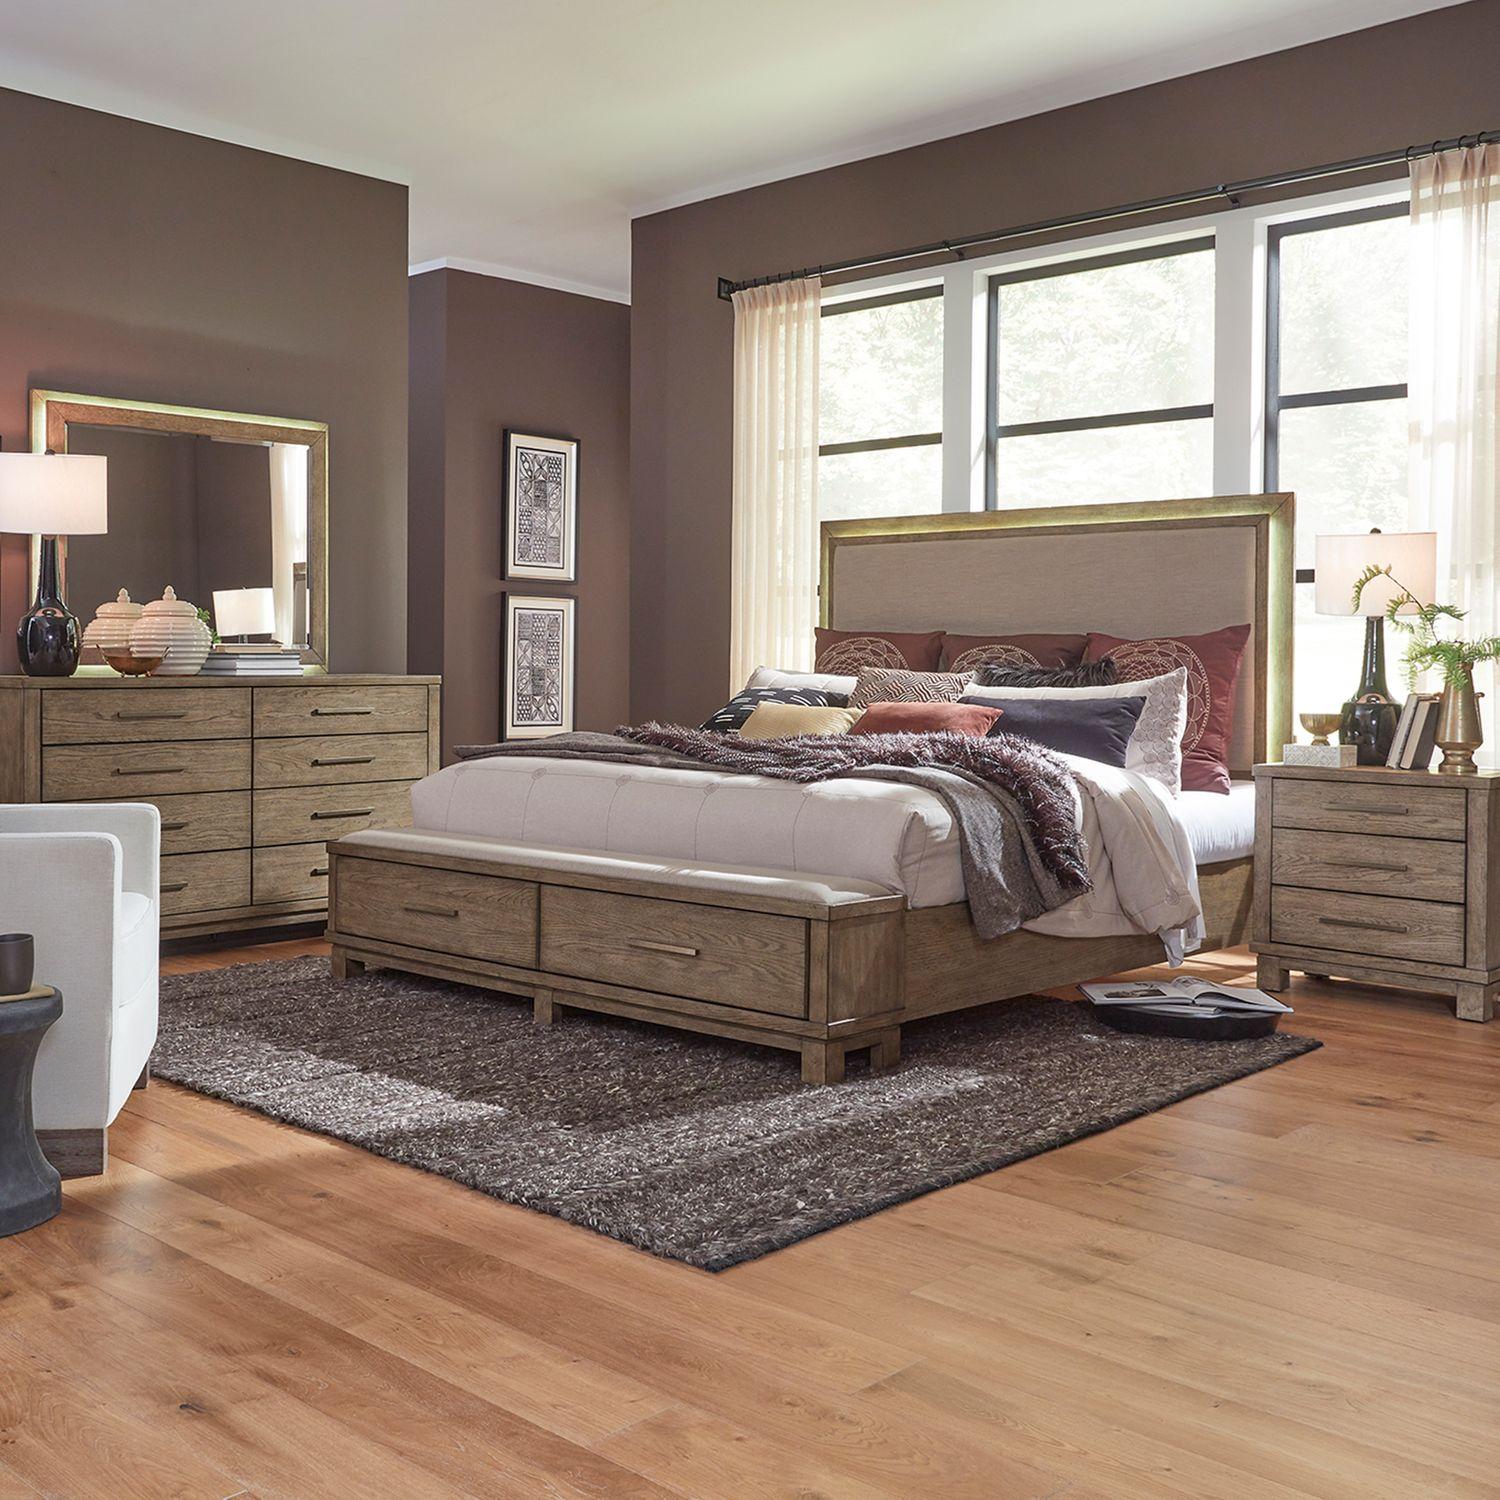 Classic Storage Bedroom Set Canyon Road (876-BR) 876-BR-KSBDMN in Brown 